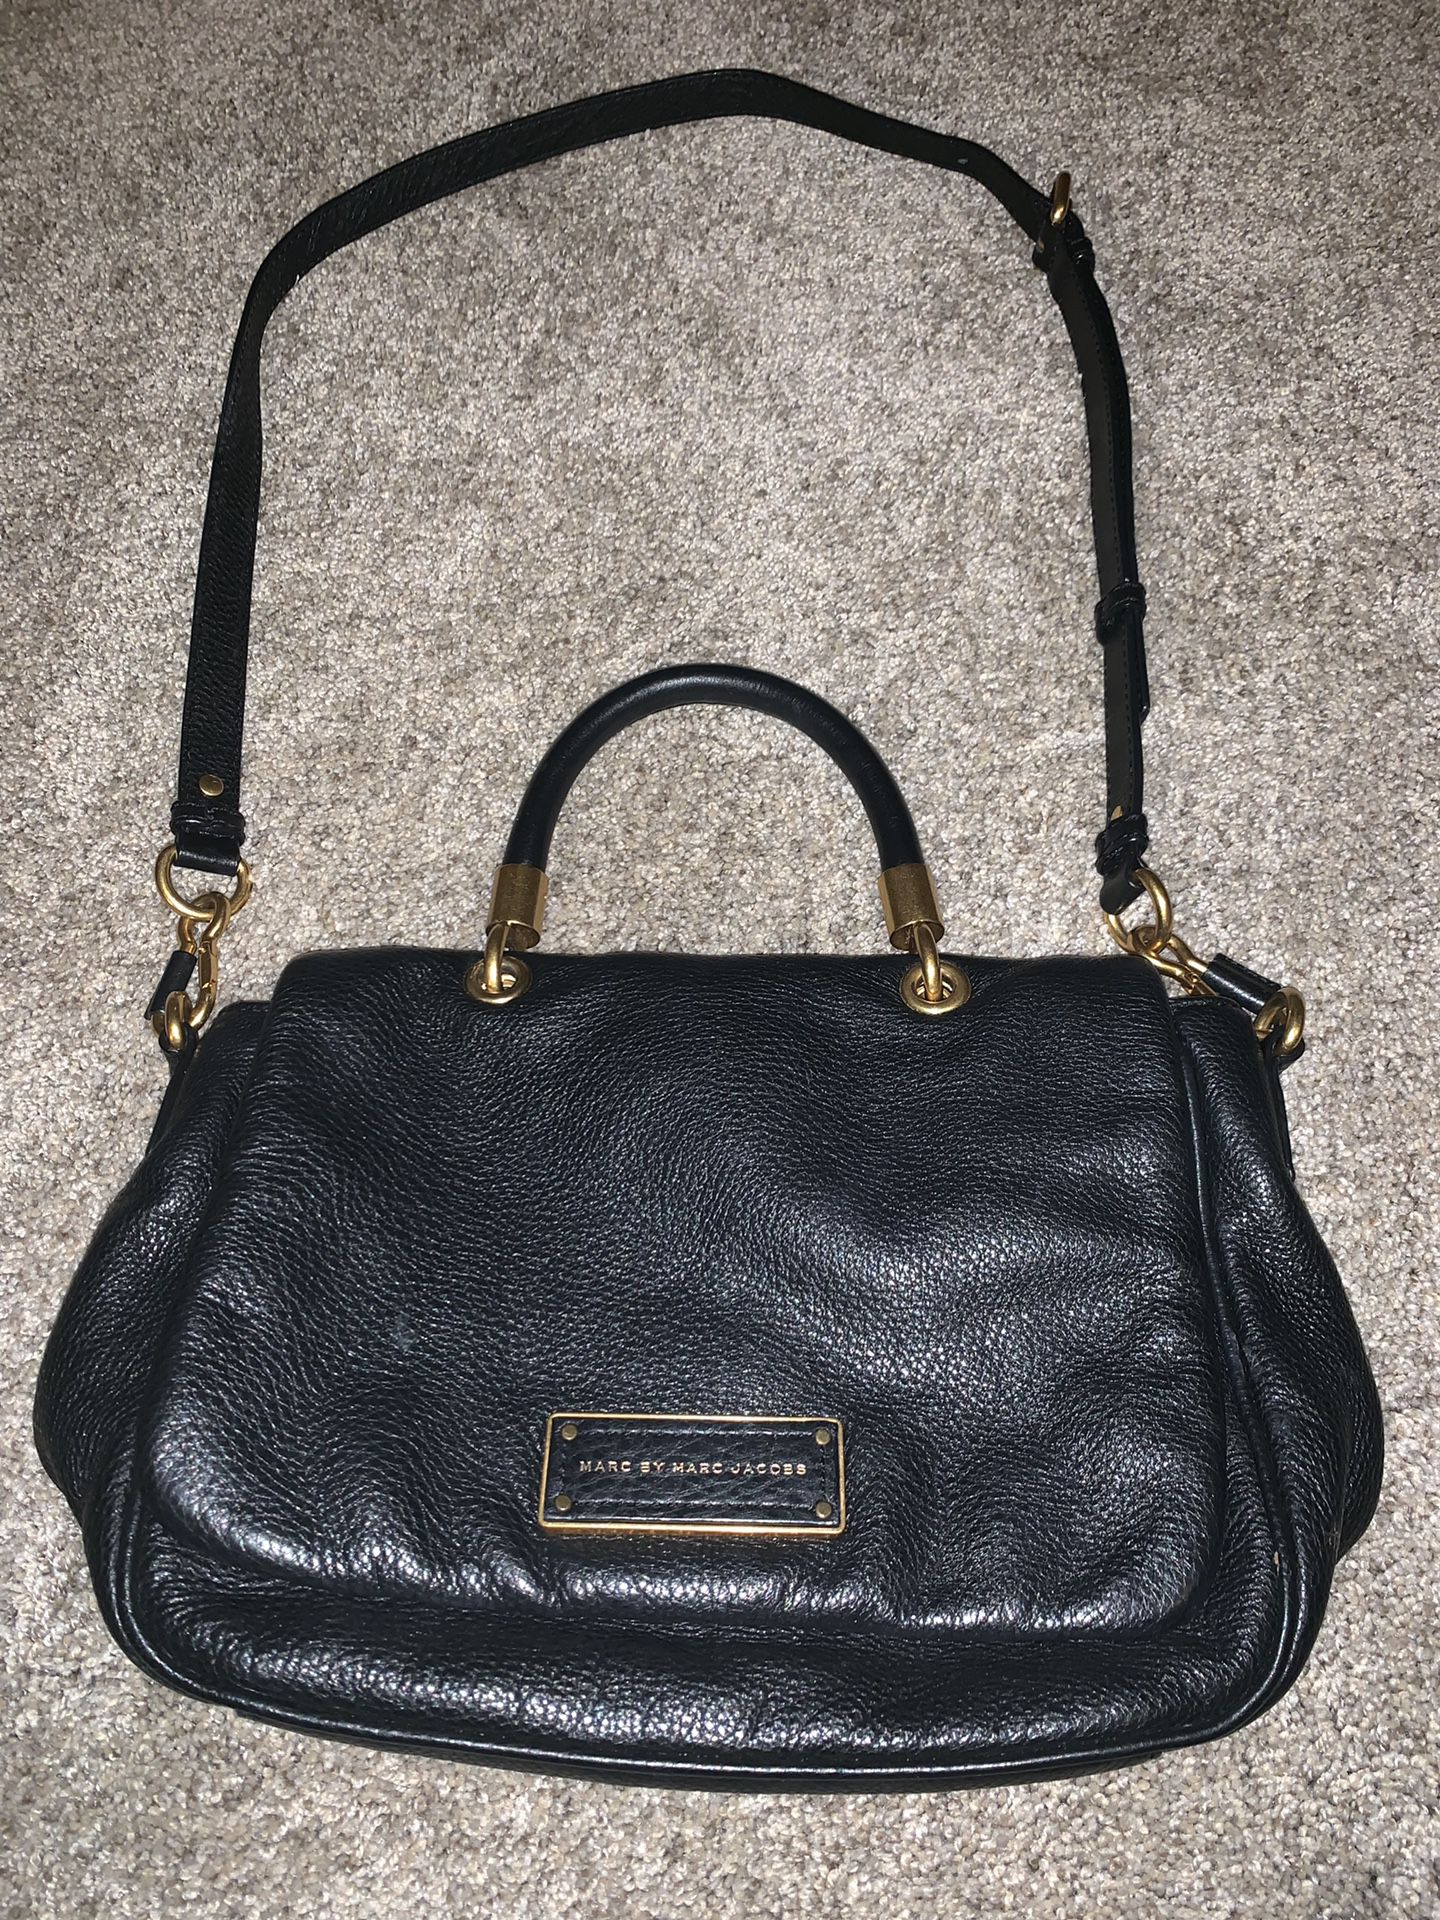 Marc by Marc Jacobs black leather bag